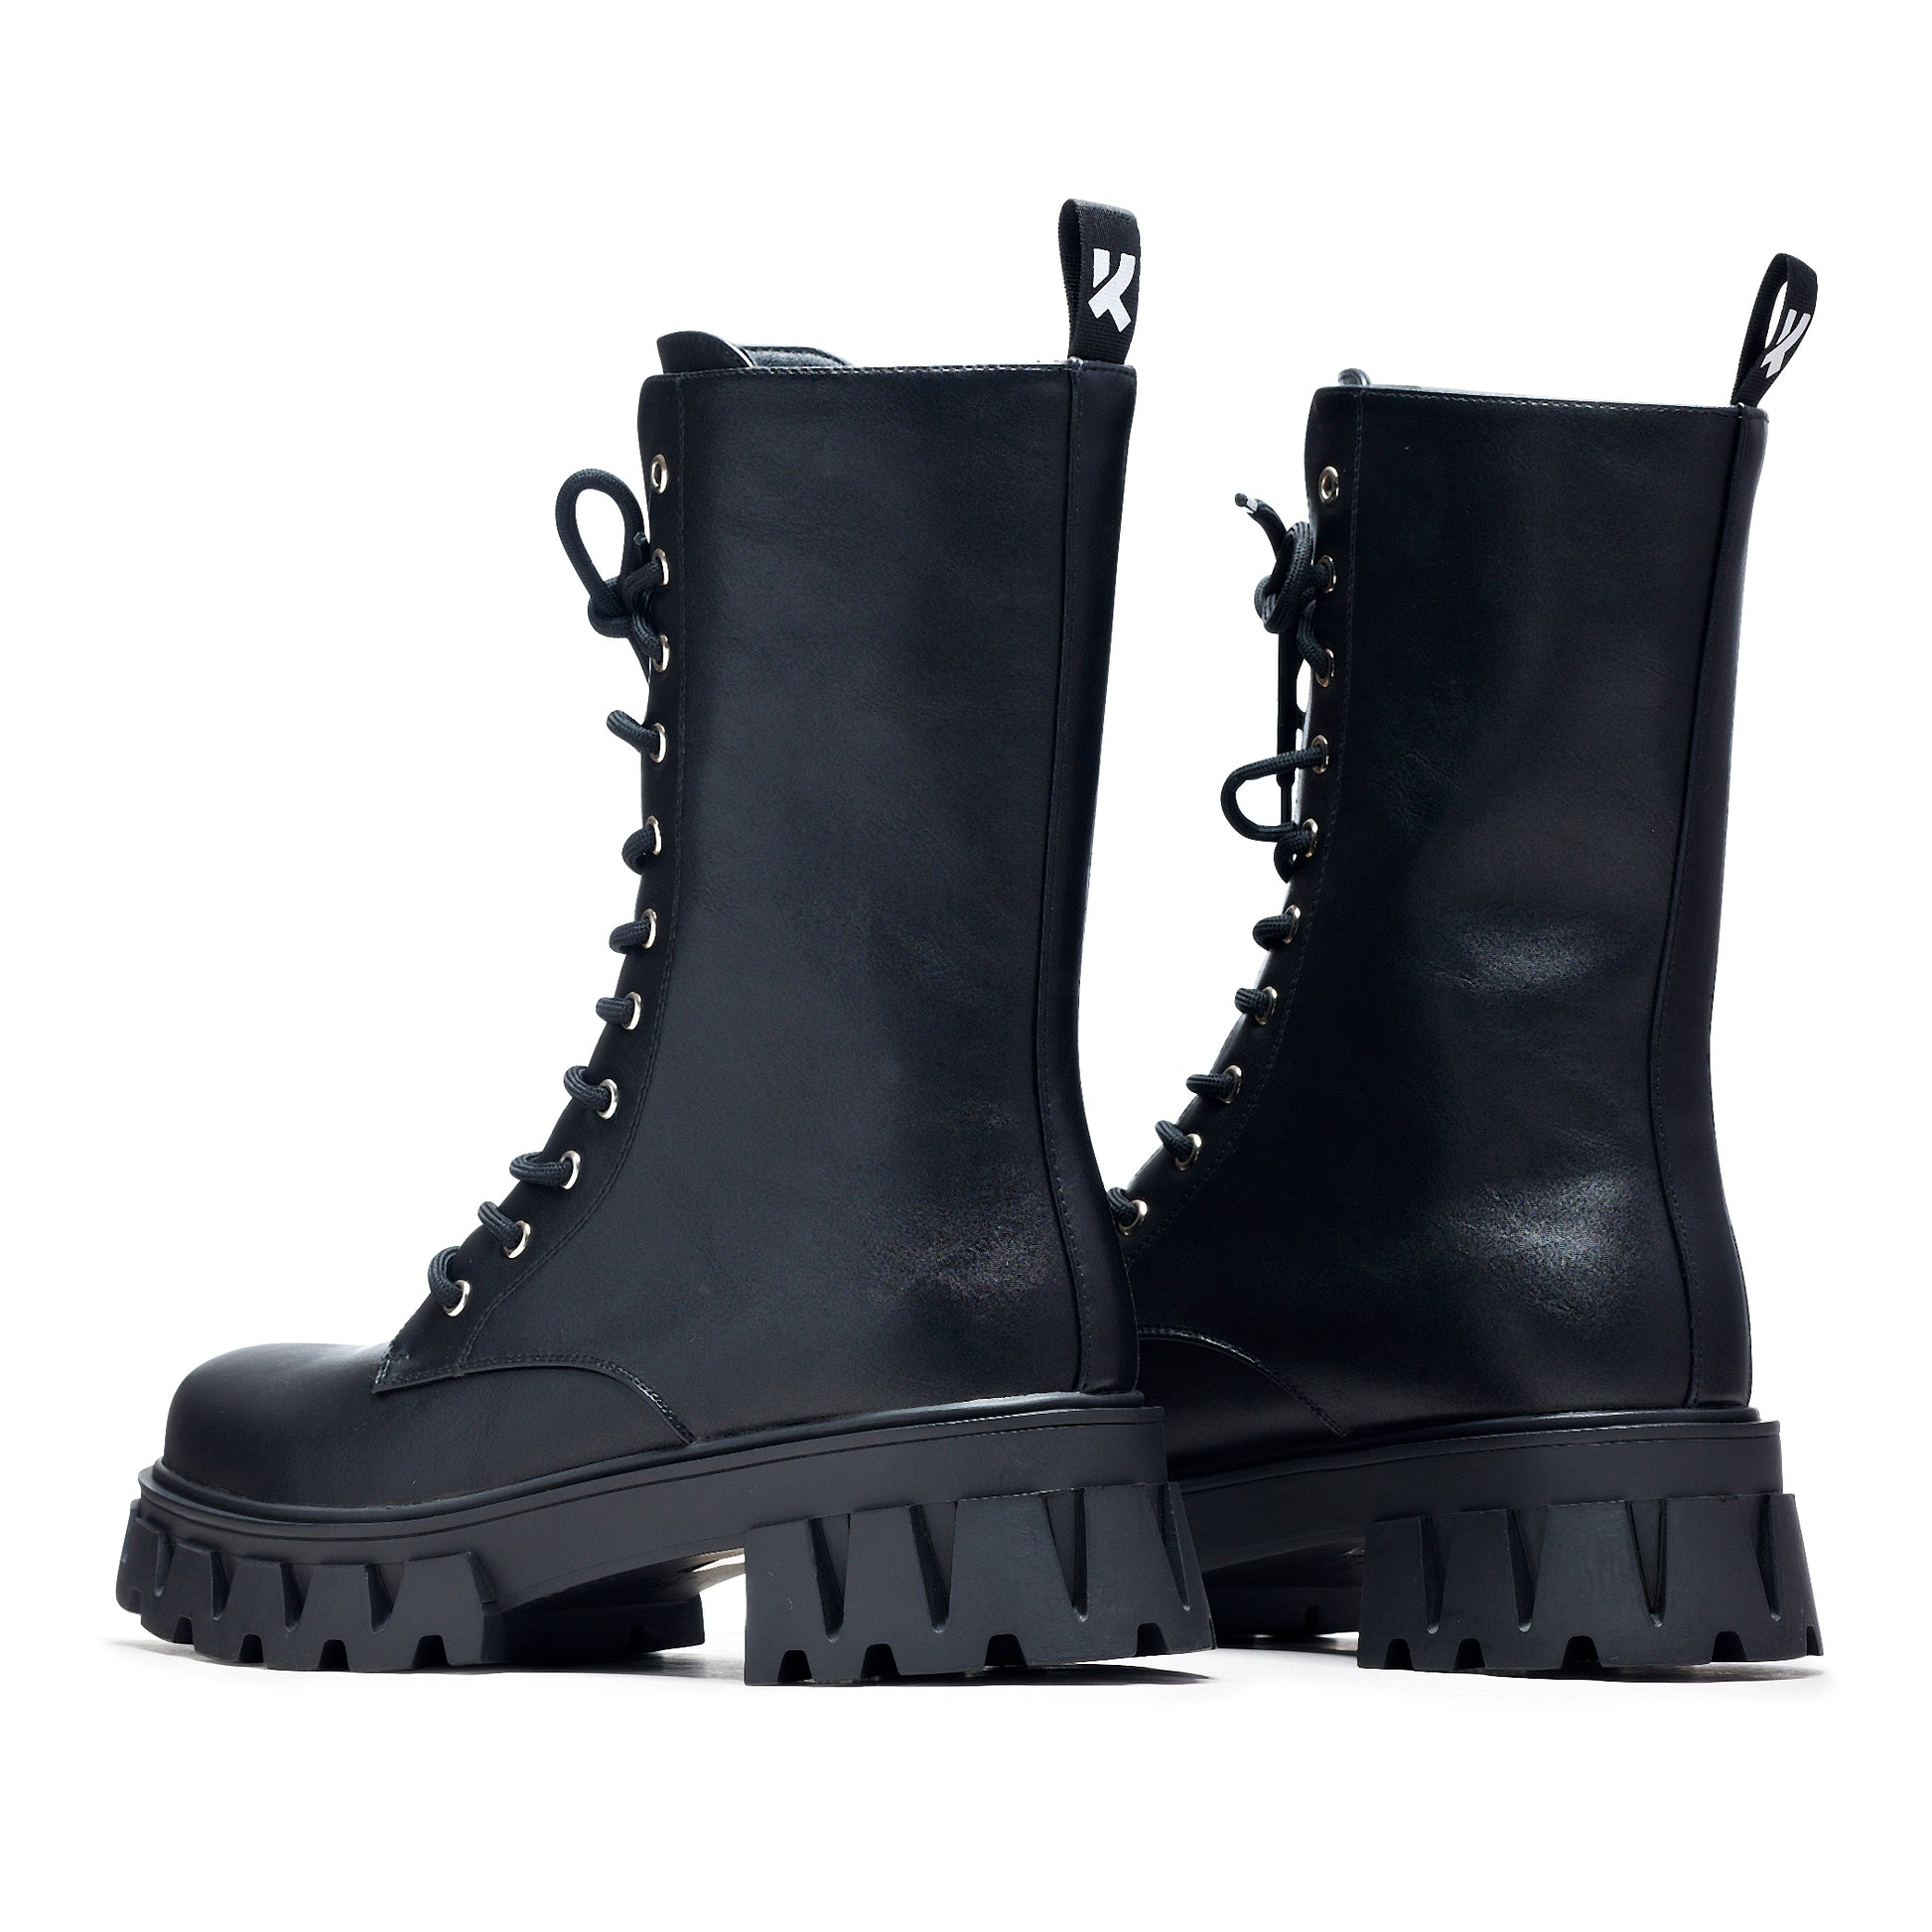 Siren Tall Lace Up Boots - Black - Ankle Boots - KOI Footwear - Black - Back View